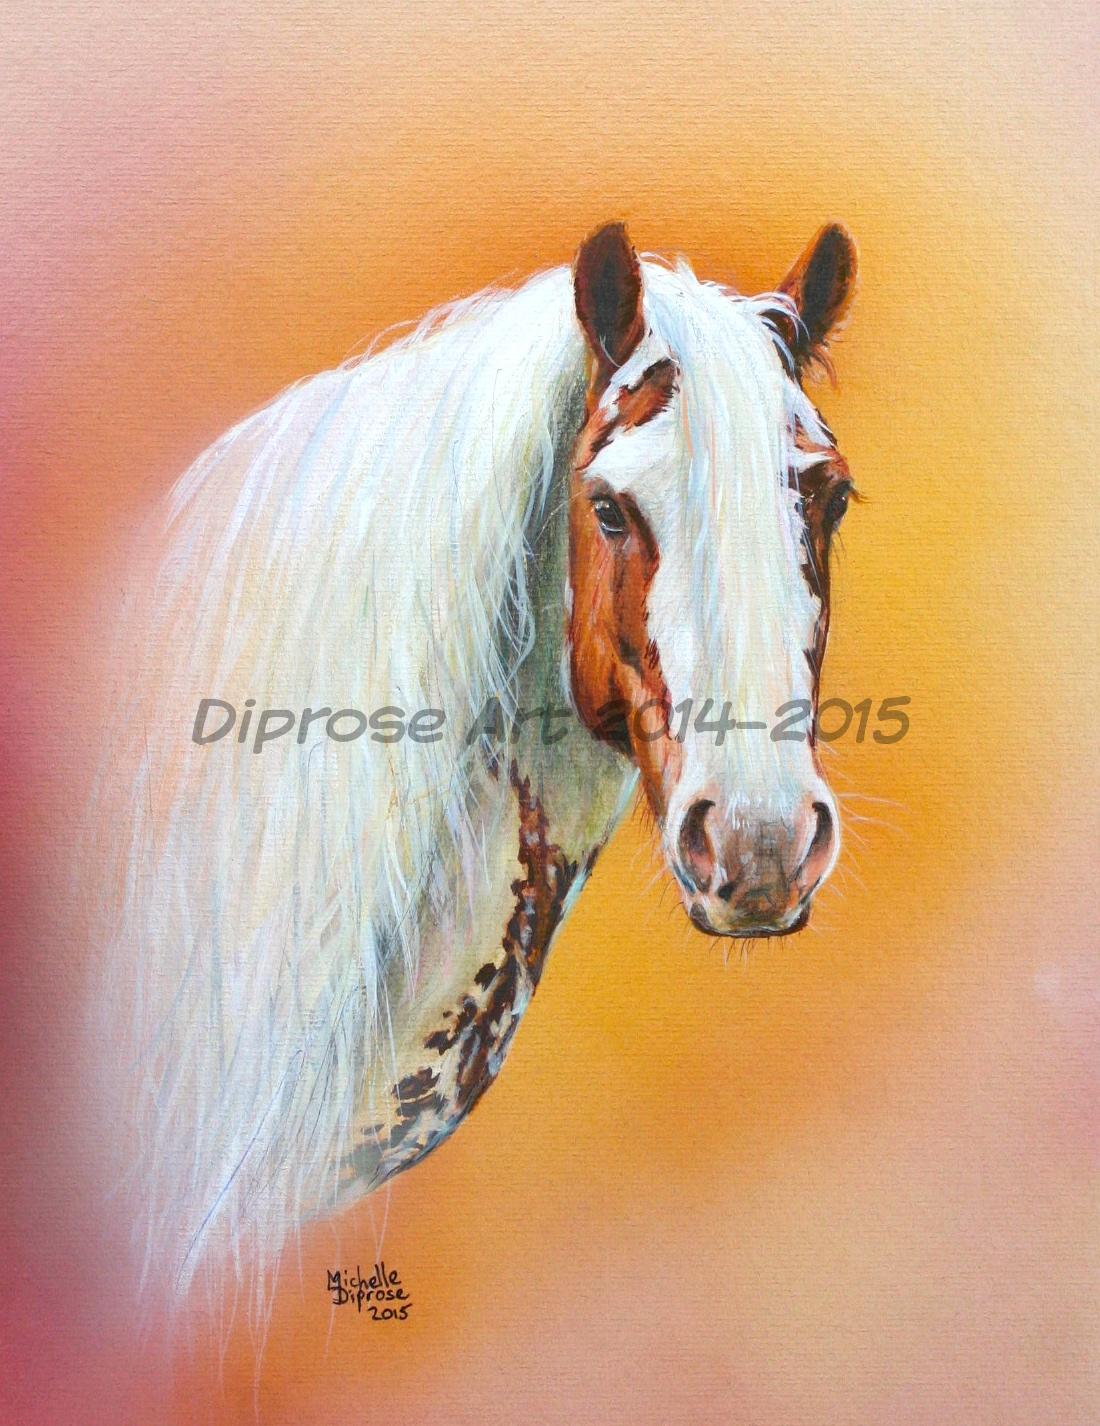 Acrylics on board - approx A4 - horse portrait - Paddy is a driving cob with the most amazing mane - I loved painting him